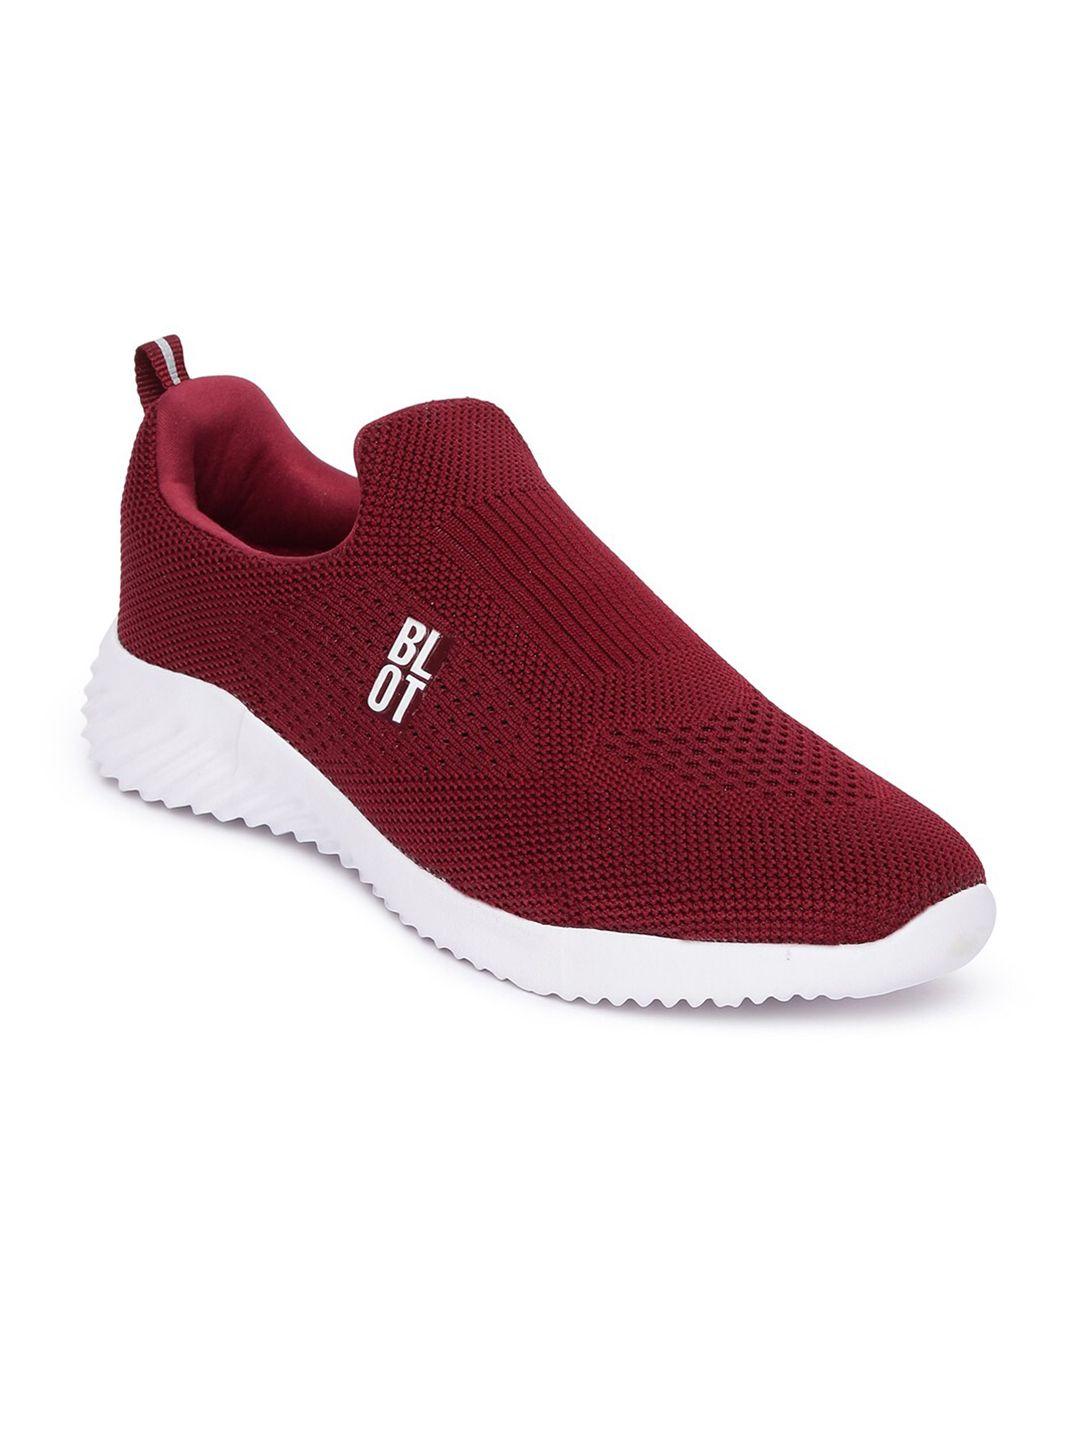 paragon men maroon canvas running knitted sports shoes